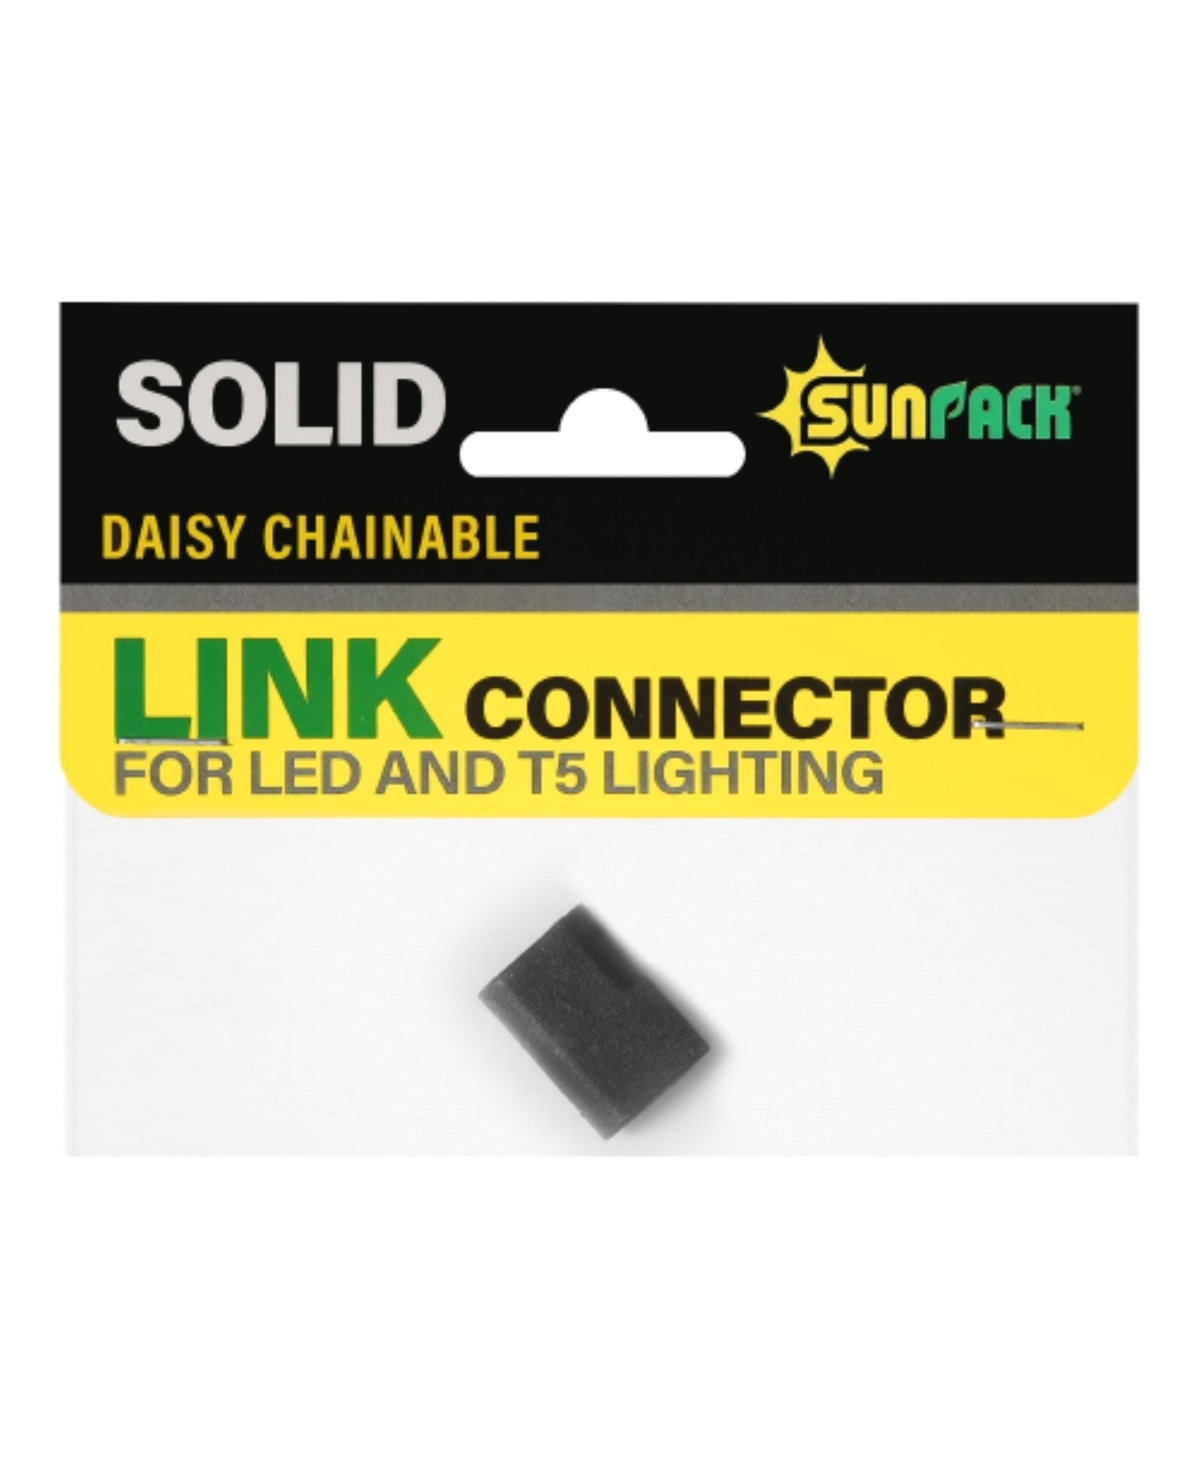 Daisy Chainable Link Connector for Led and T5 Lighting - Black